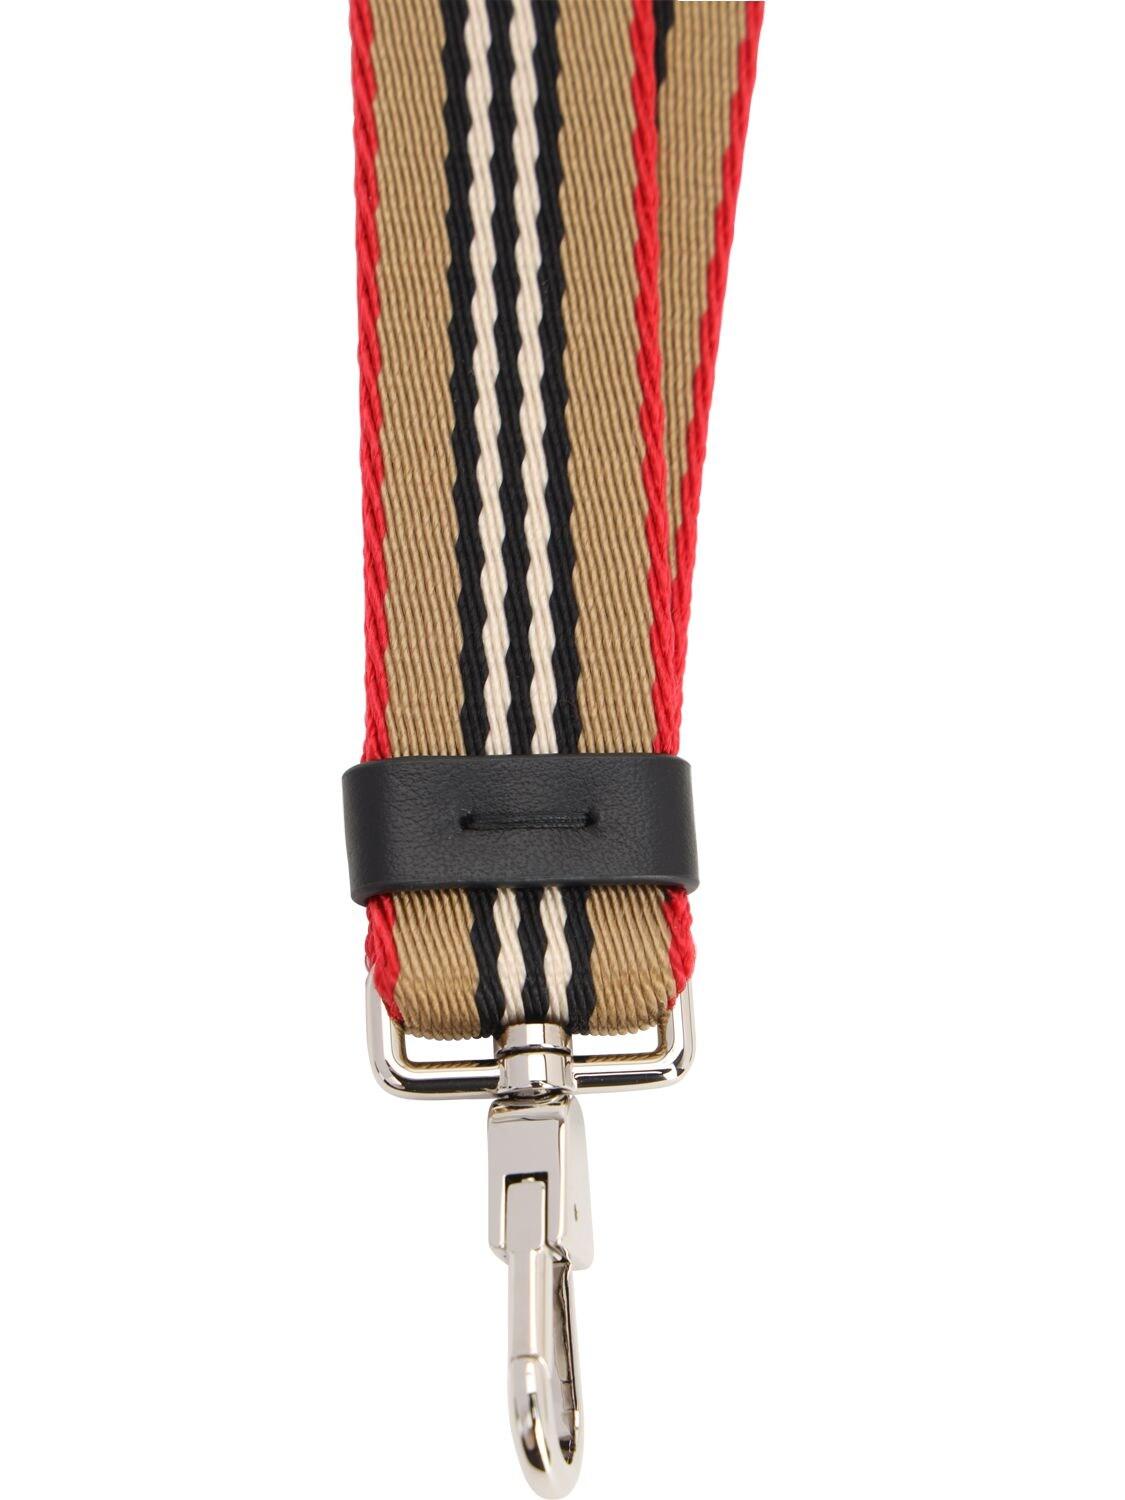 Burberry Synthetic Heritage Striped Nylon Lanyard Keychain for Men - Lyst